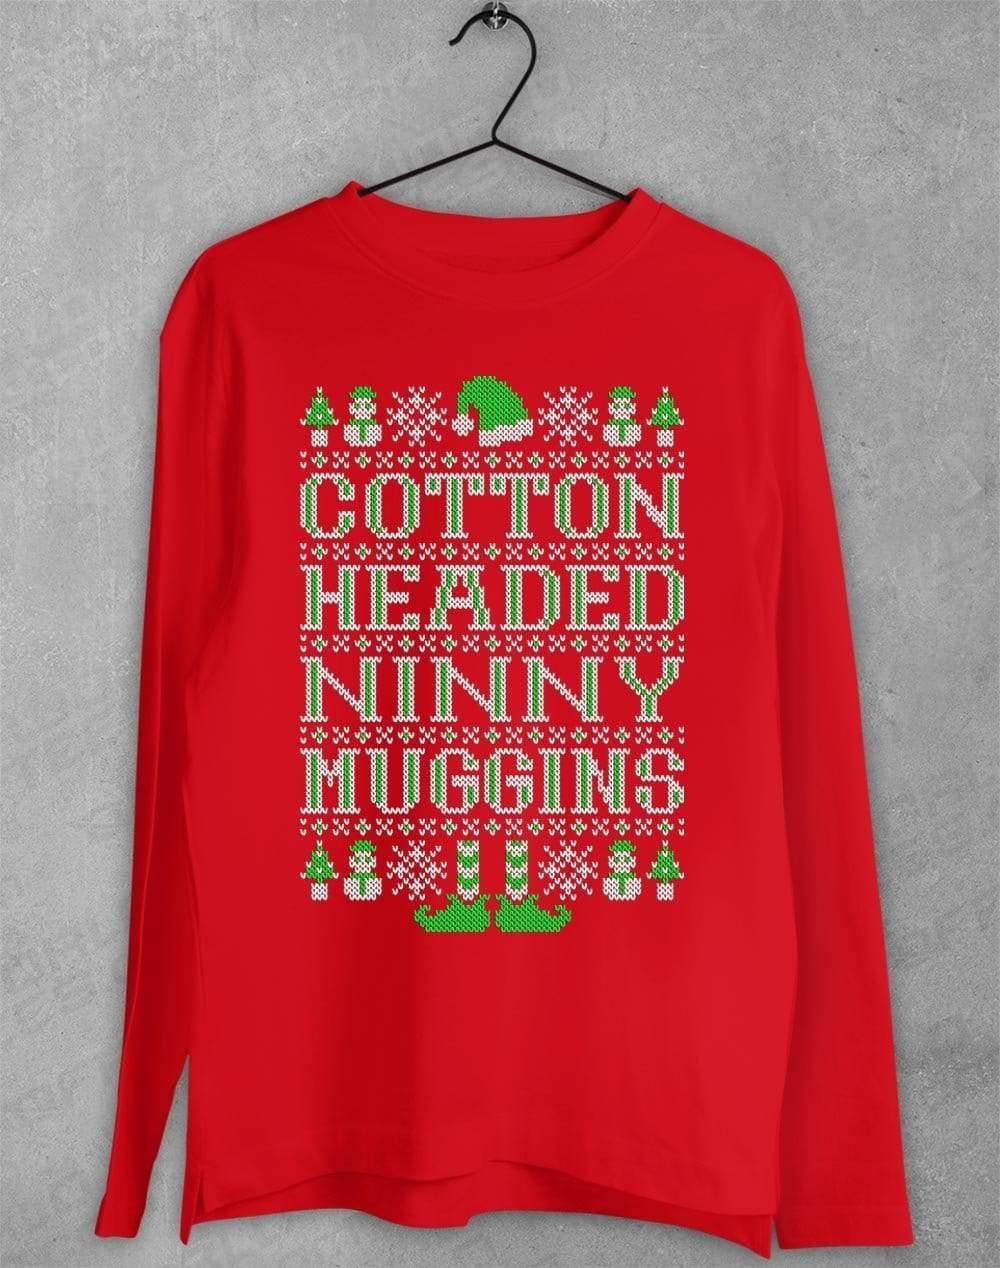 Cotton Headed Ninny Muggins Festive Knitted-Look Long Sleeve T-Shirt S / Red  - Off World Tees